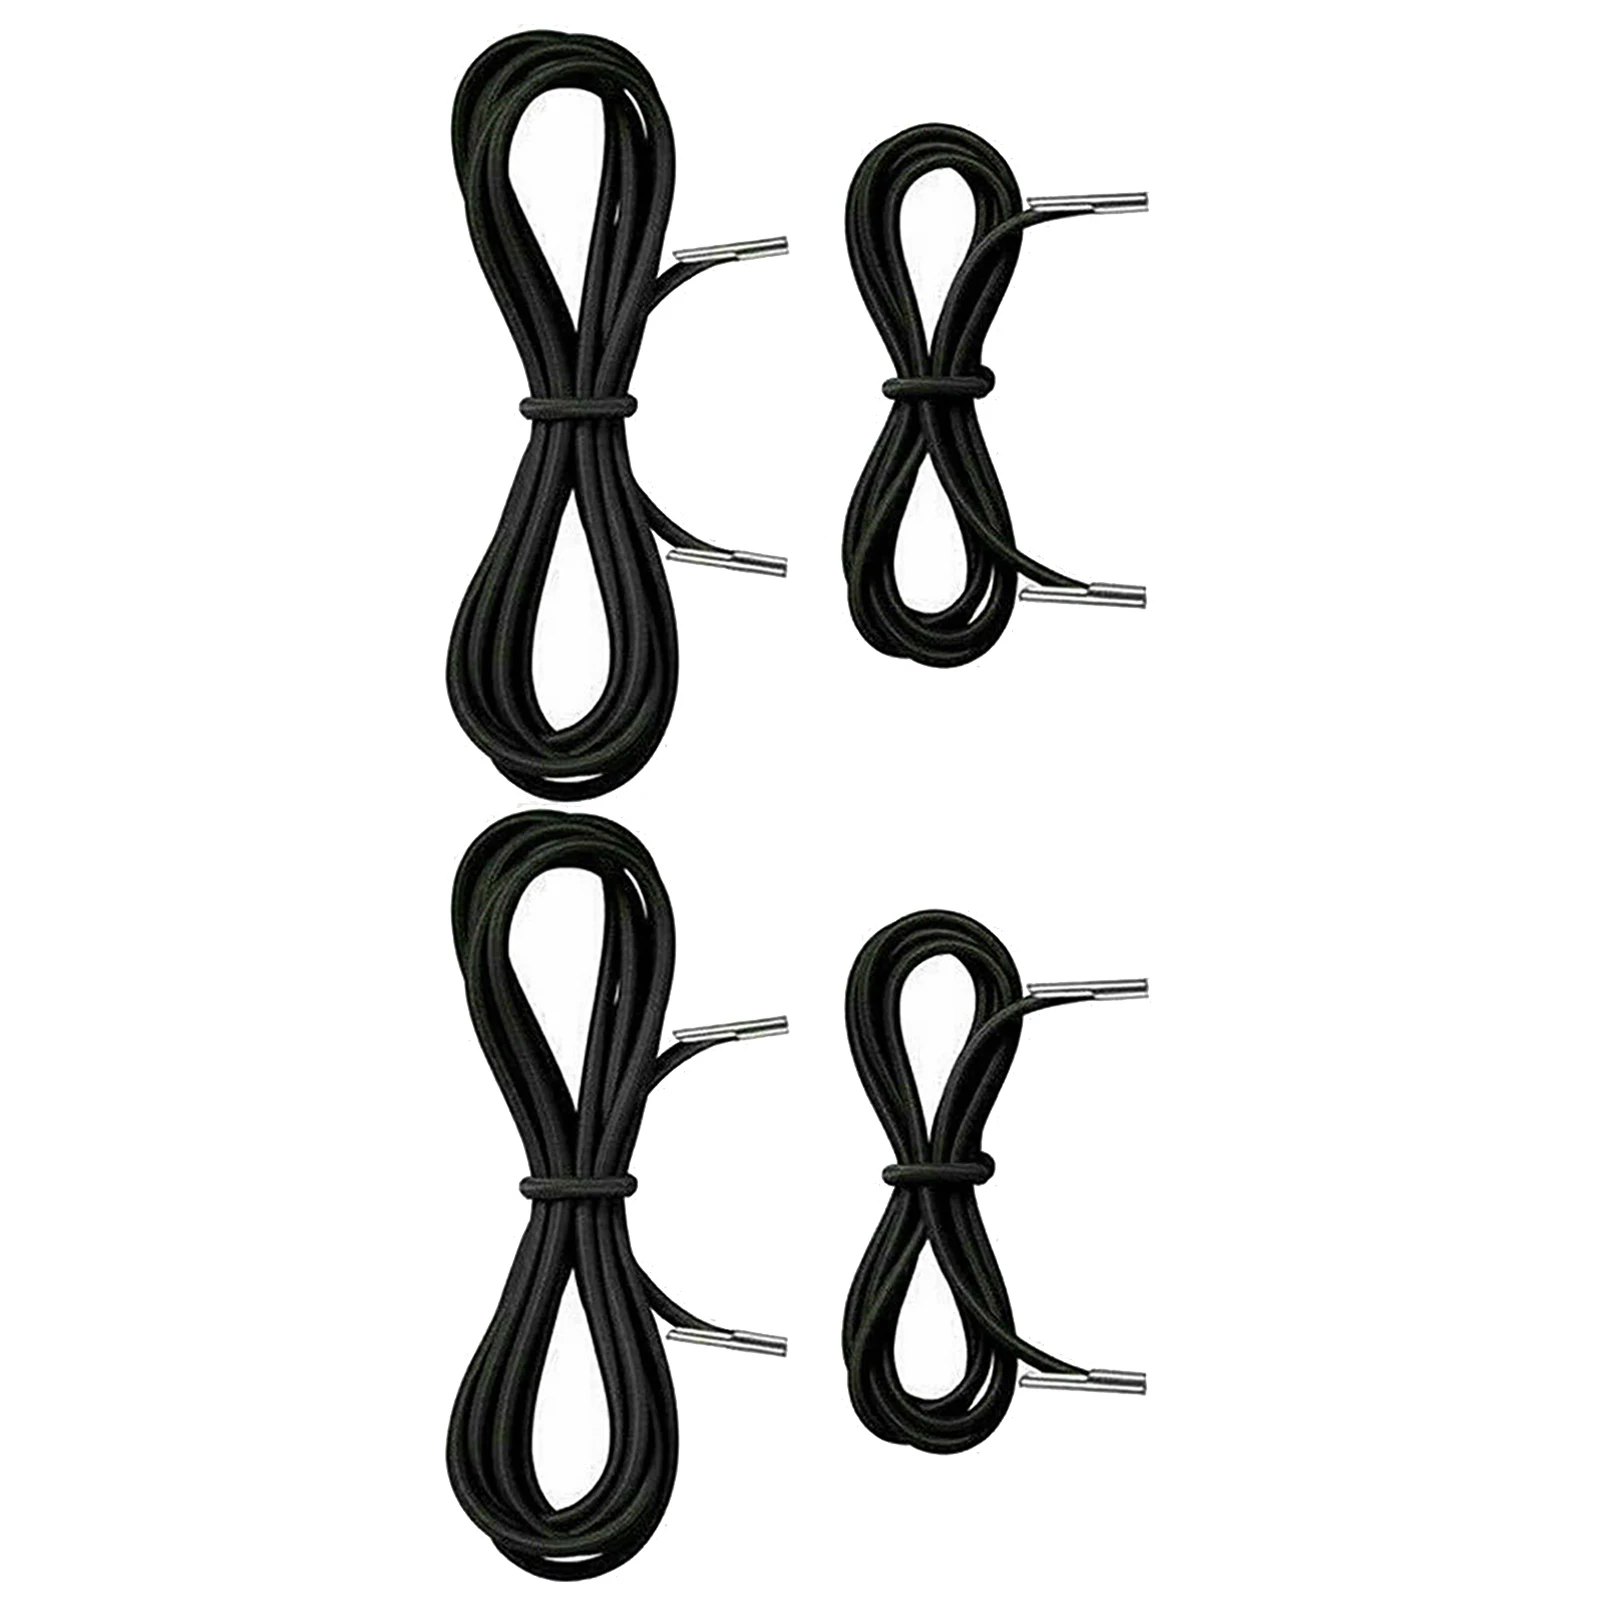 

Replacement Cord For Zero Gravitys Chair Laces Antigravity Chair Replacement Cords Bungee Elastic Lawn Chair Cord Patio Recliner